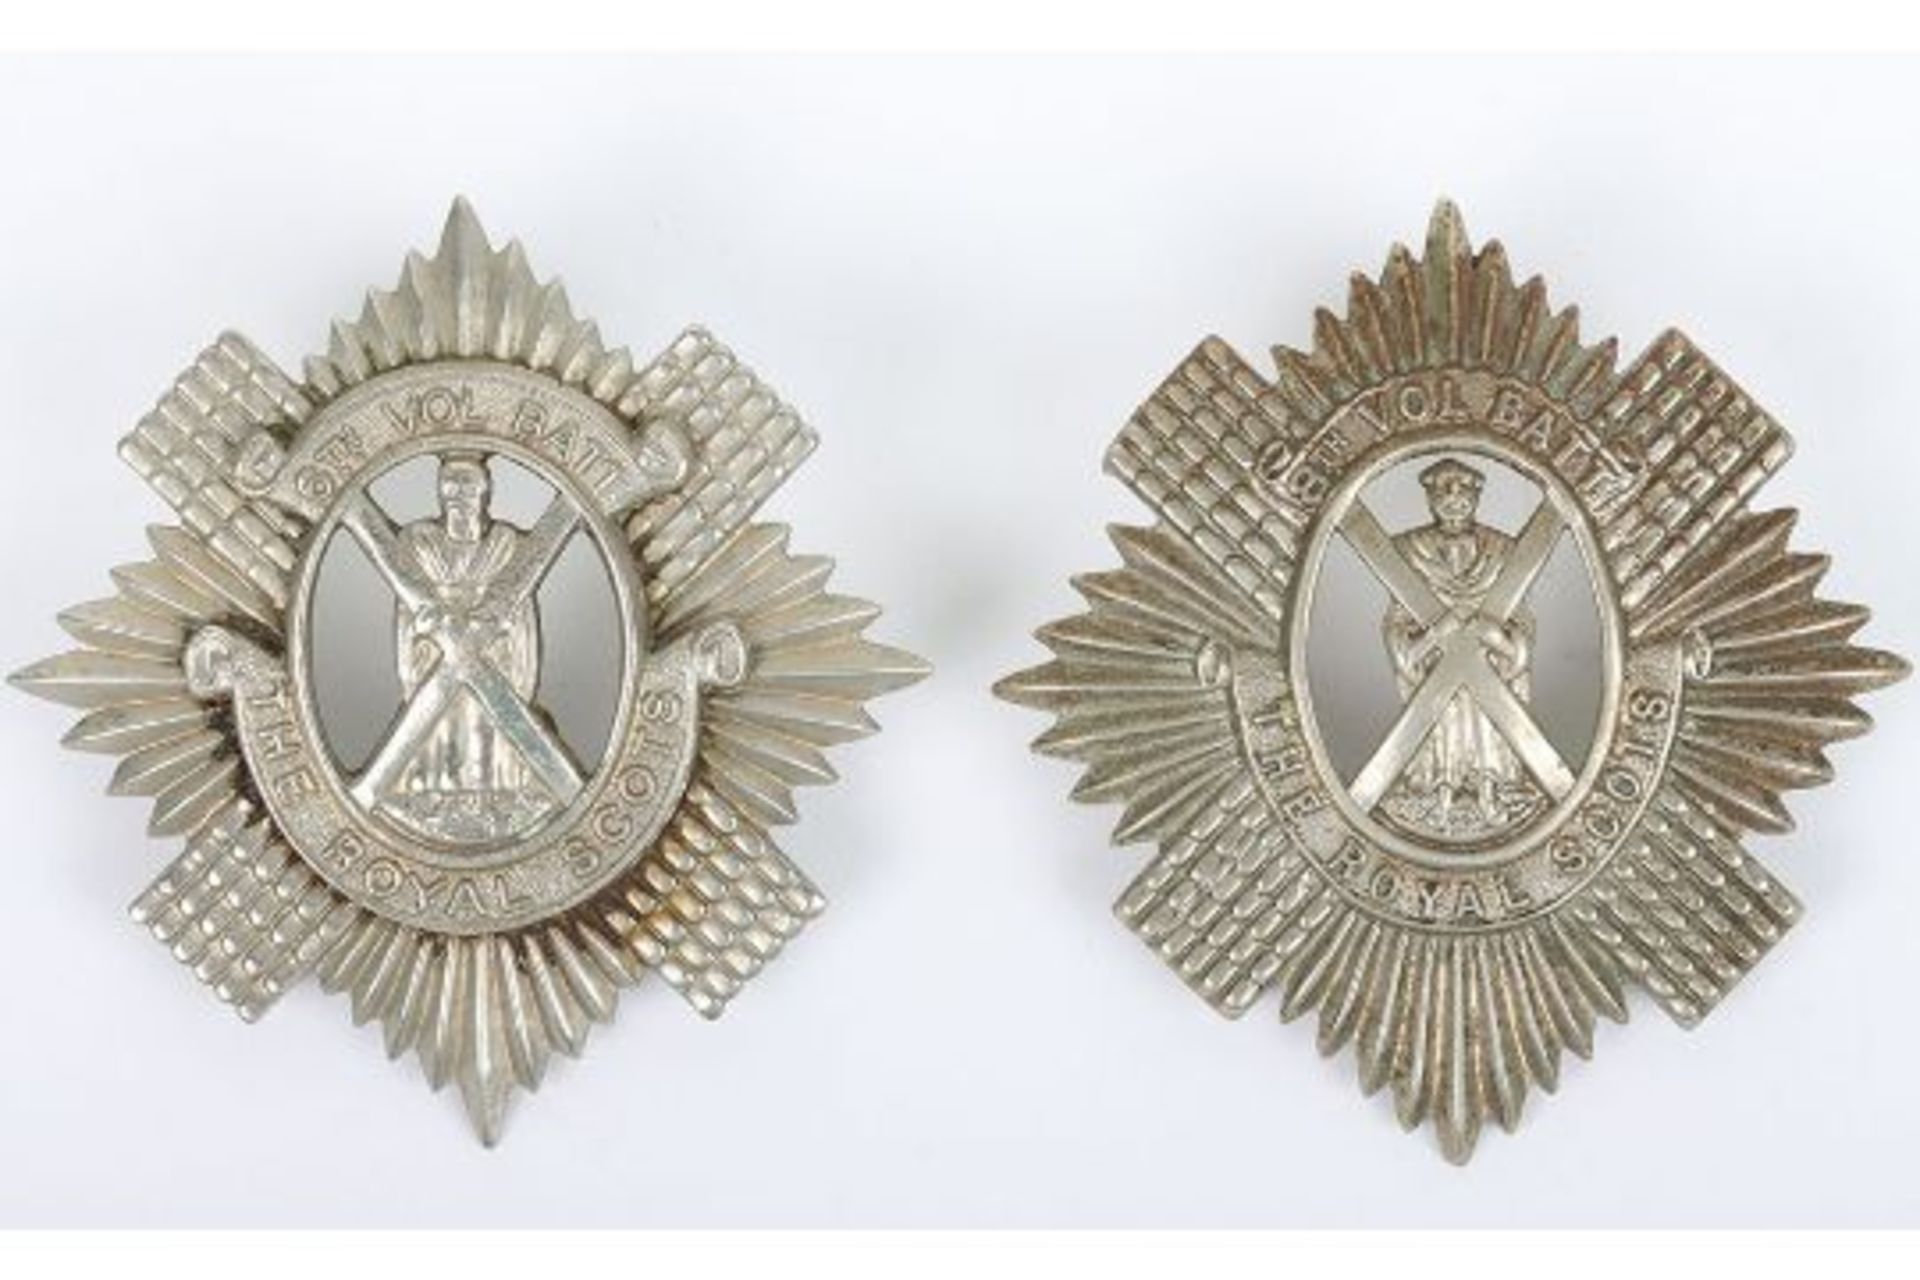 6th & 8th Volunteer Battalion The Royal Scots Glengarry Badges